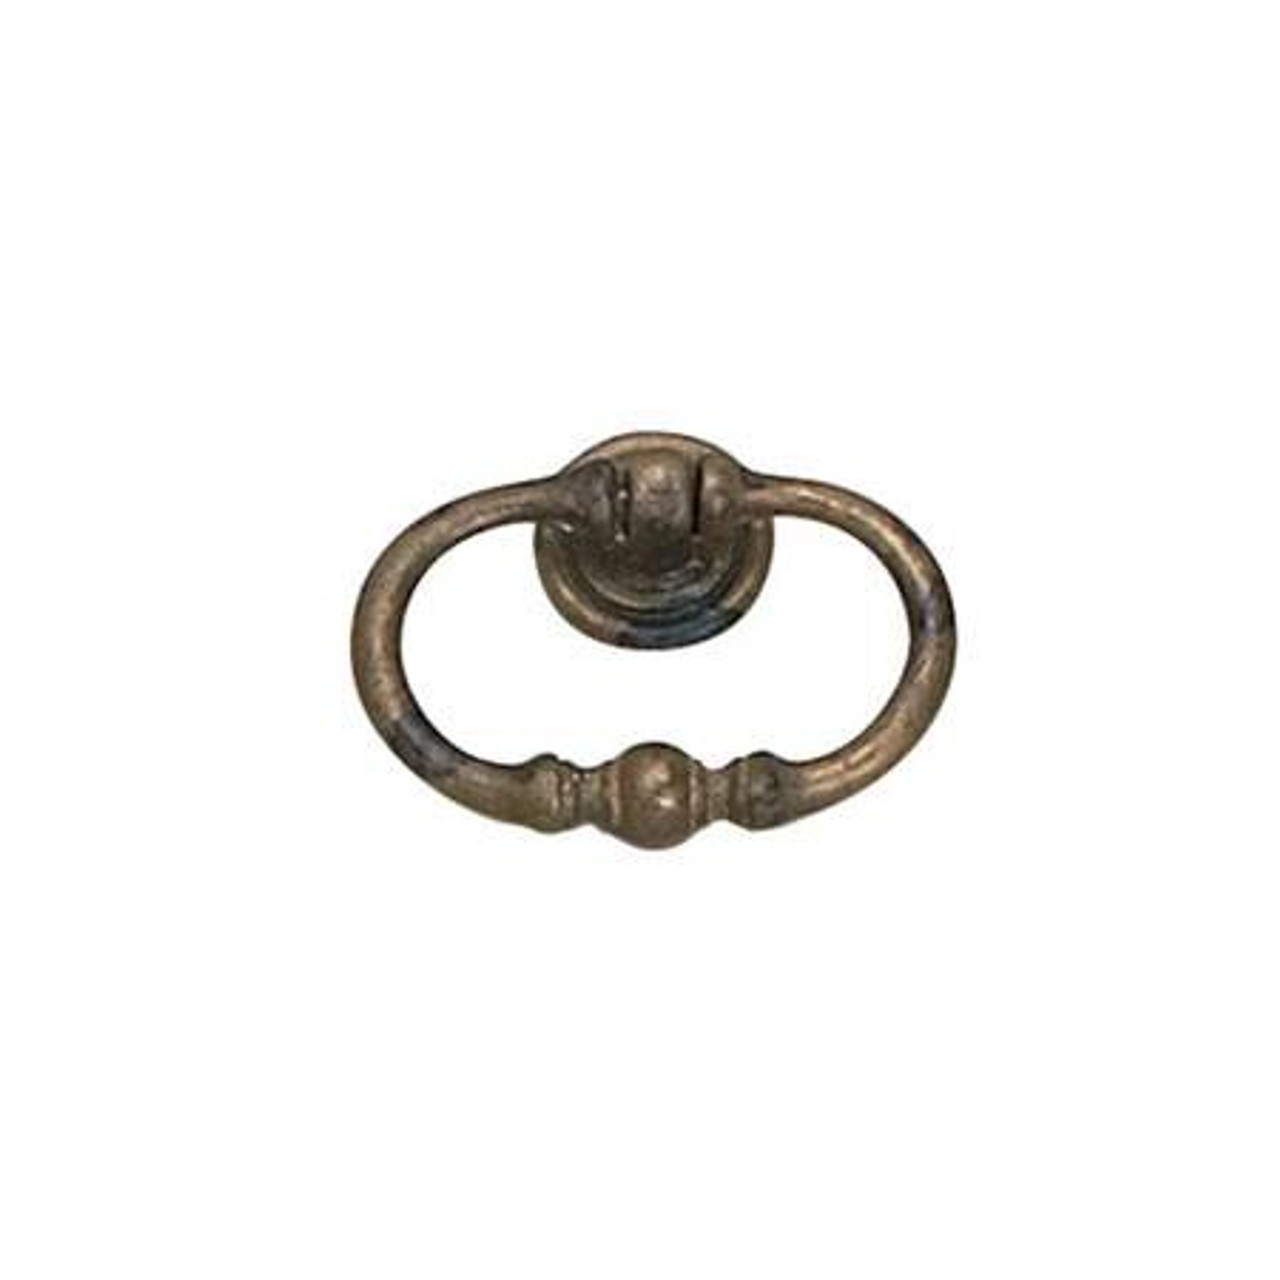 Restorers Classic Small Ring Pull with Scallop Backplate | Small rings,  Brass, Antique hardware